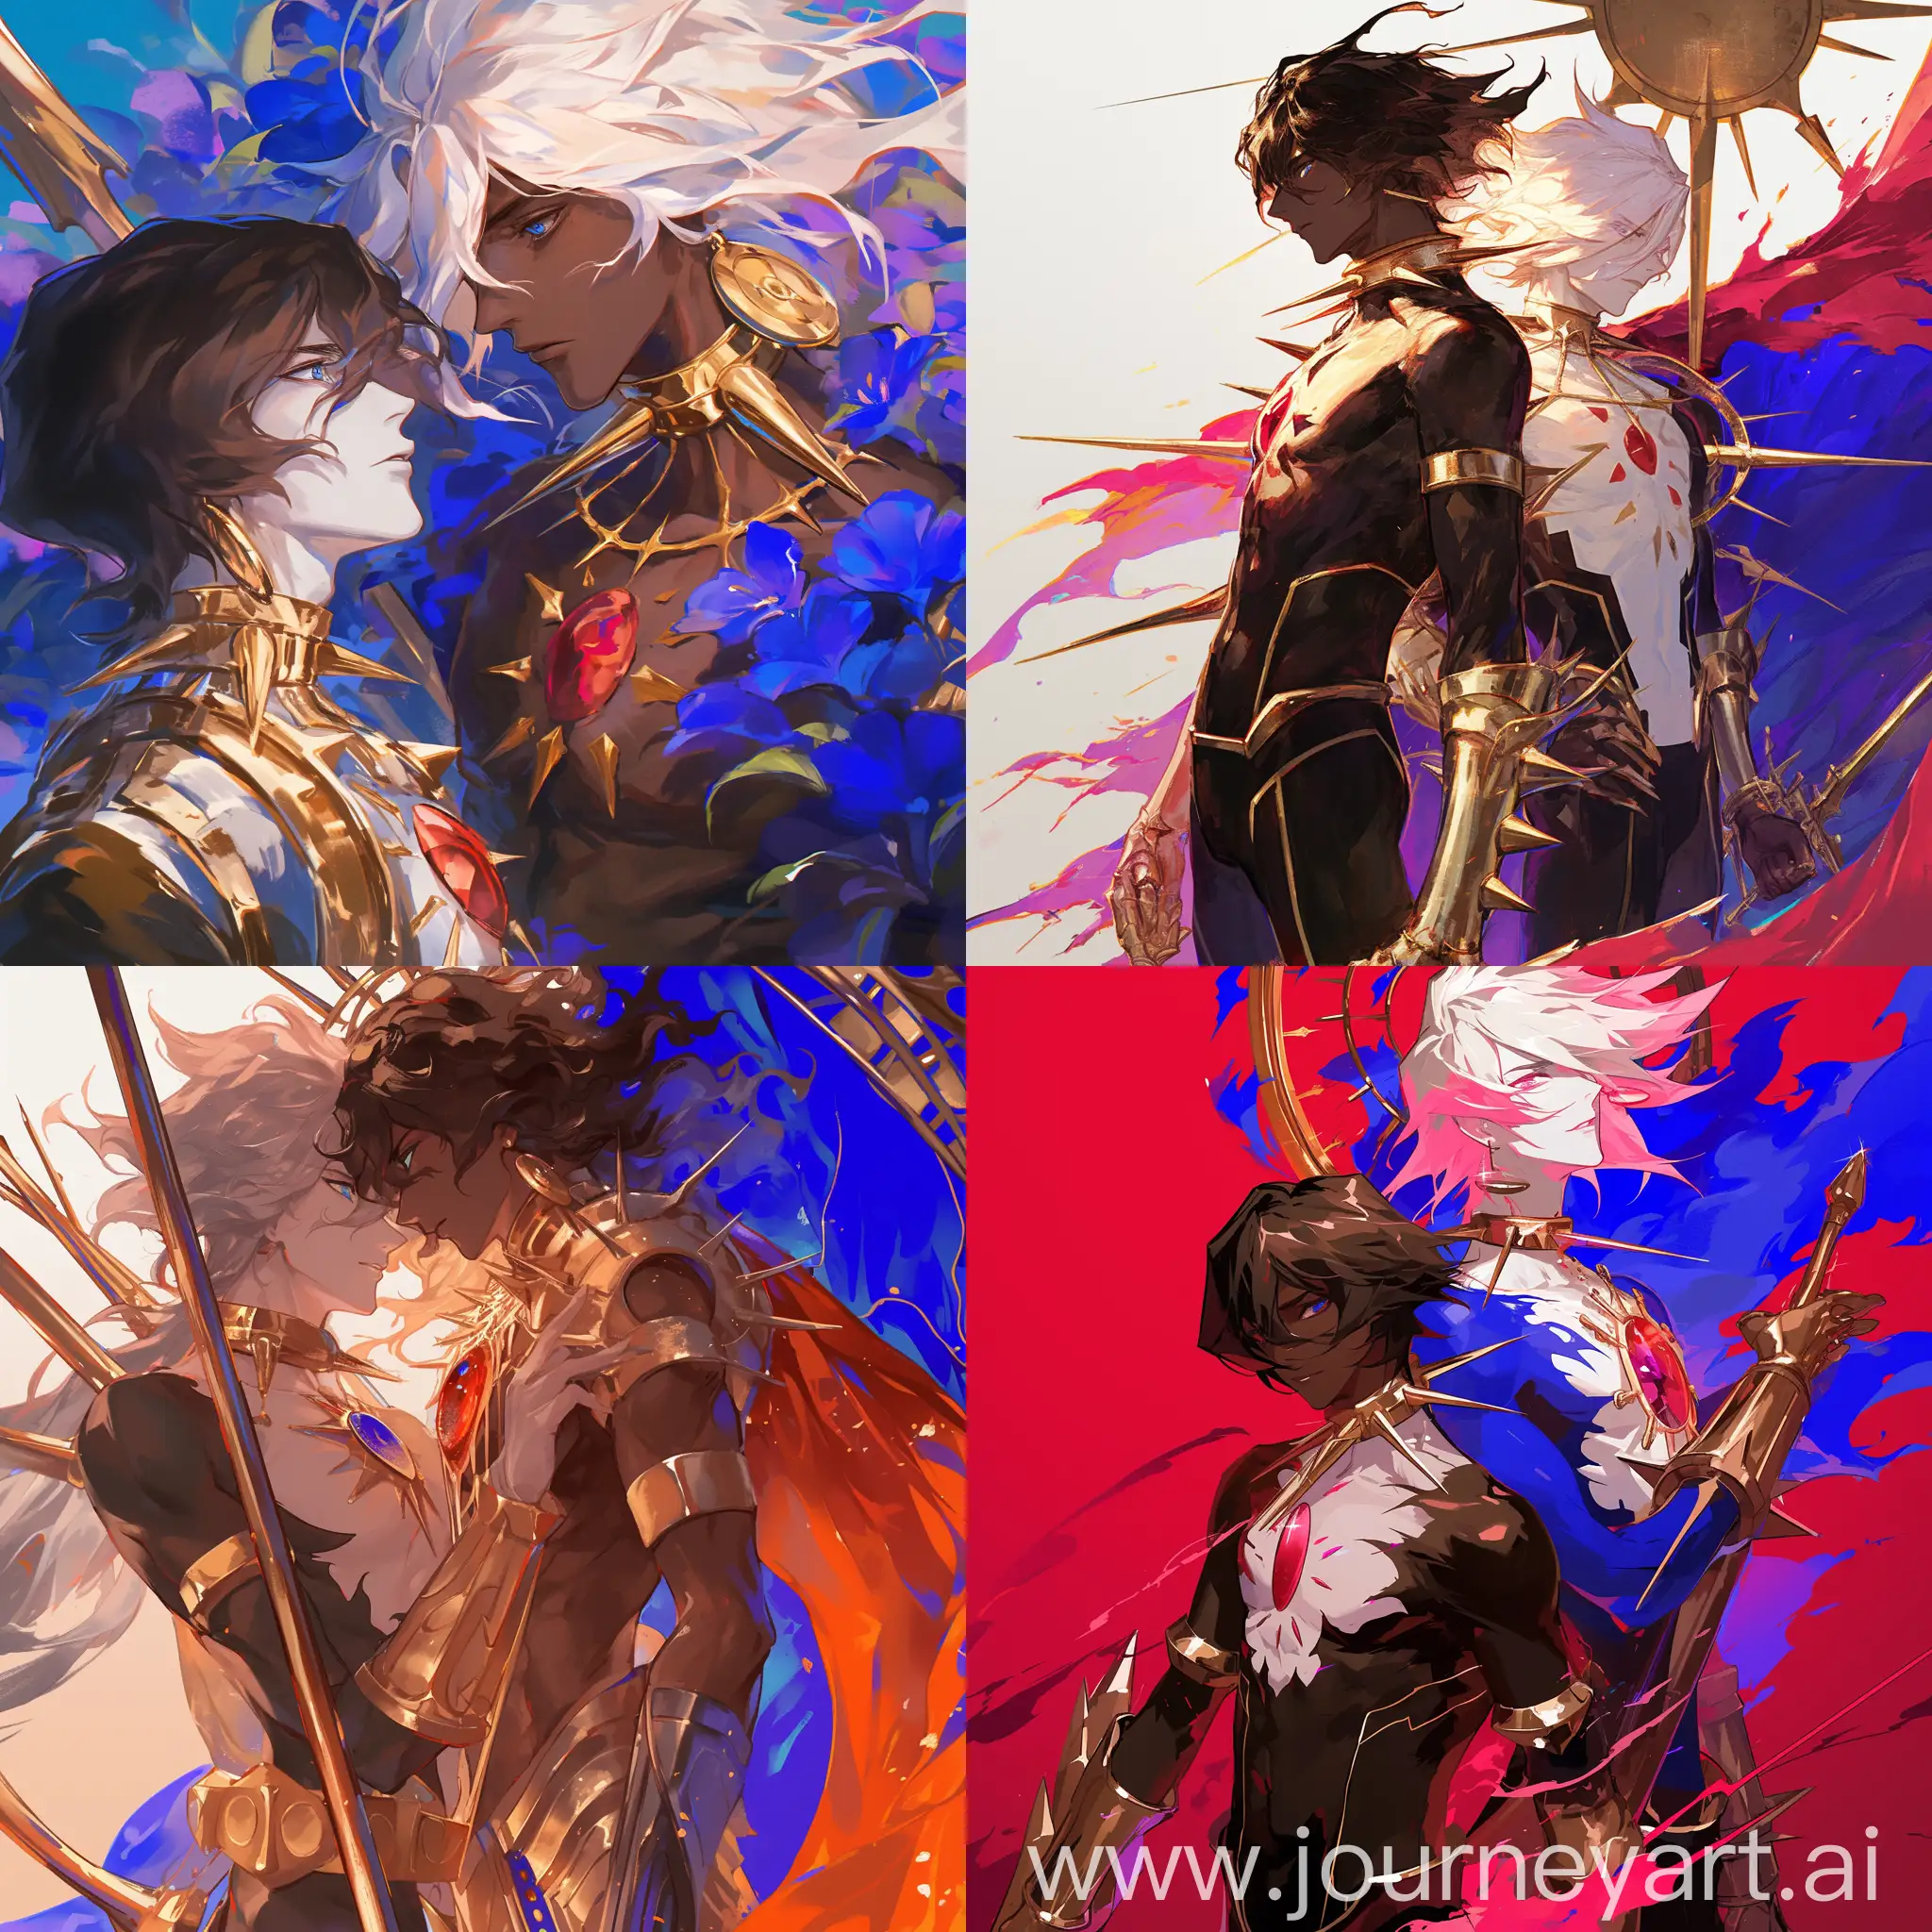 Epic-Duel-Karna-and-Arjuna-Confrontation-with-Volumetric-Lighting